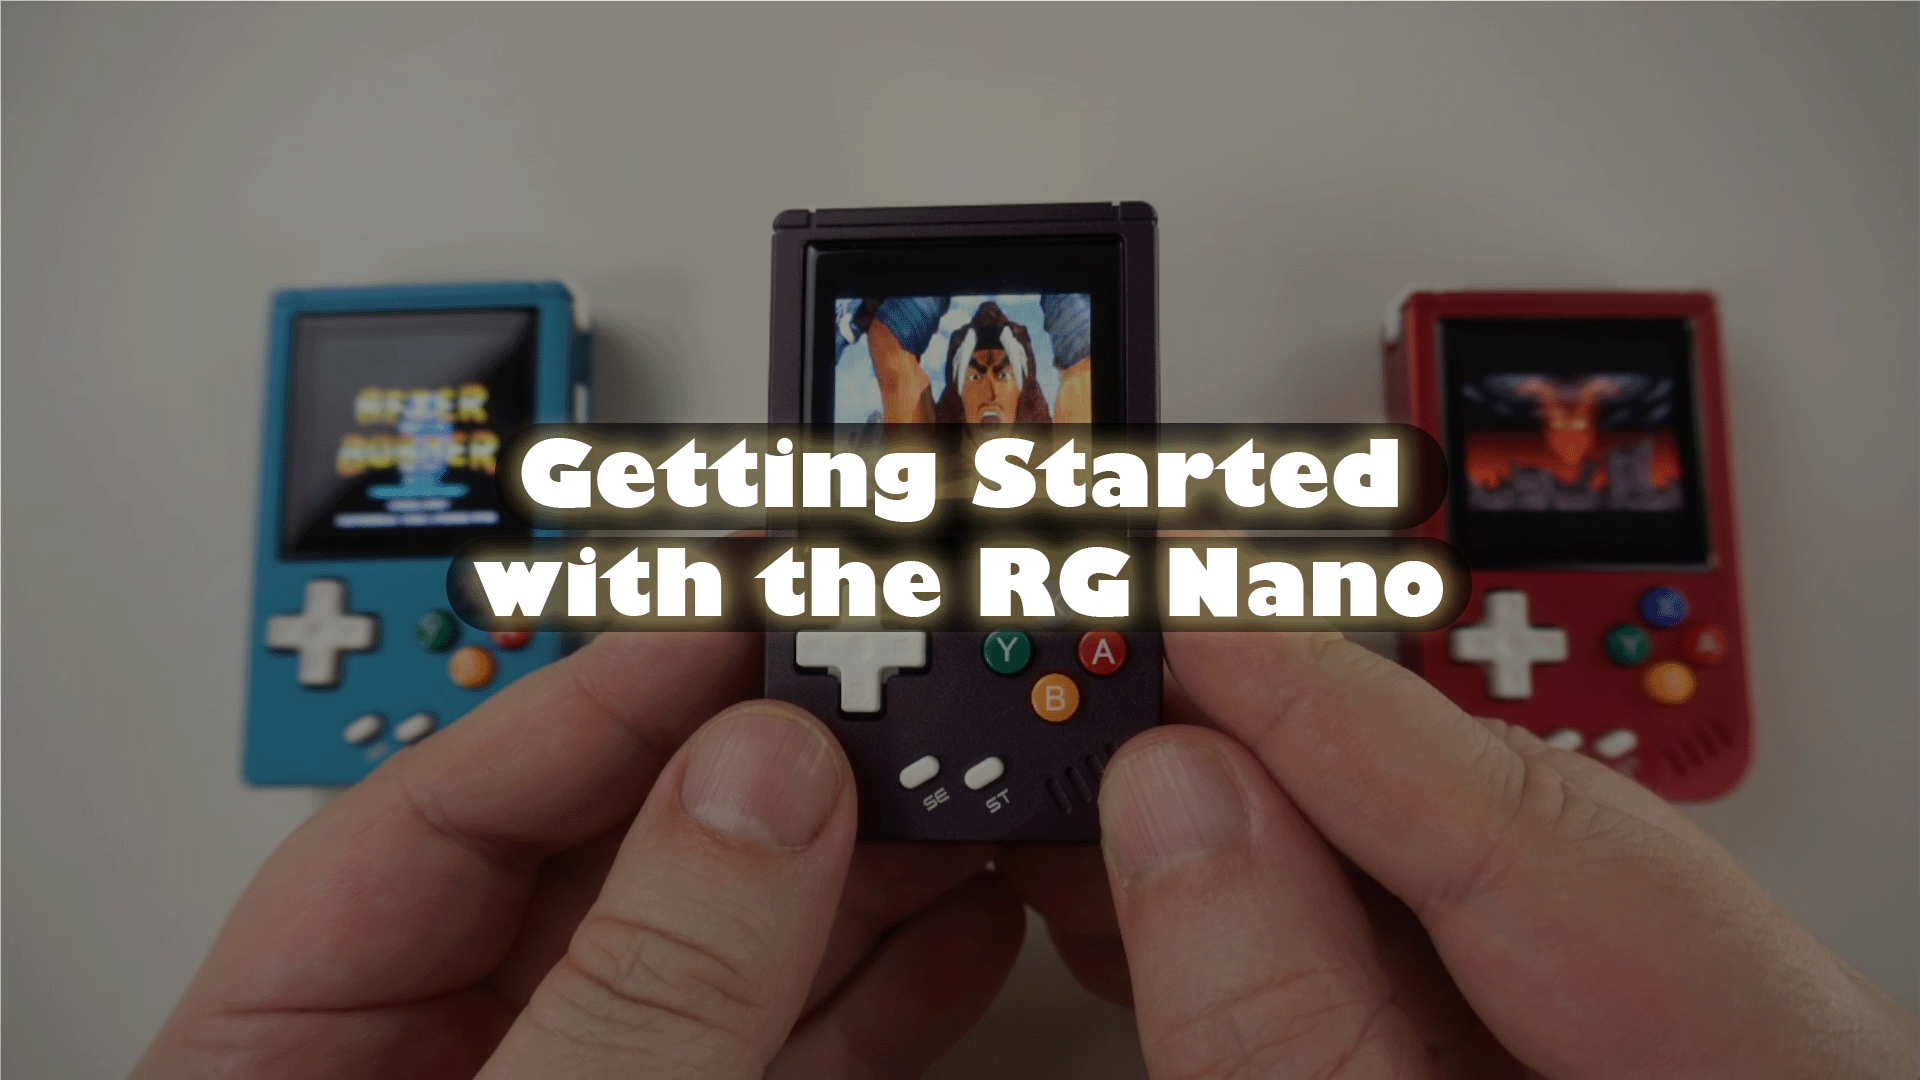 So, You’ve Just Bought an RG Nano…